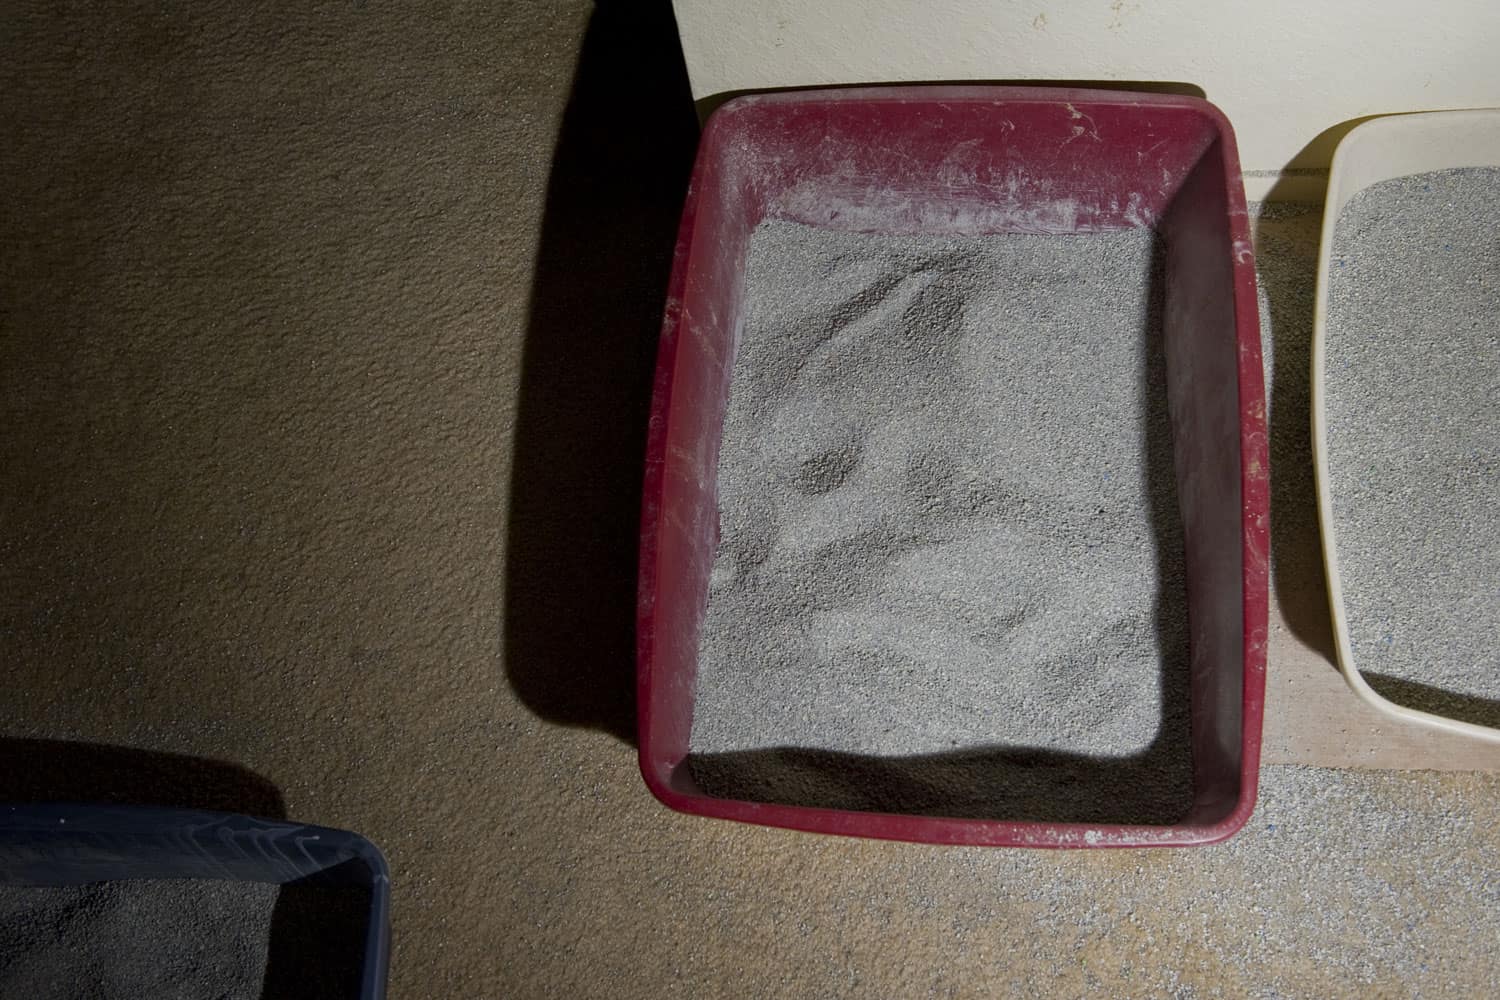 A litterbox filled with cat litter